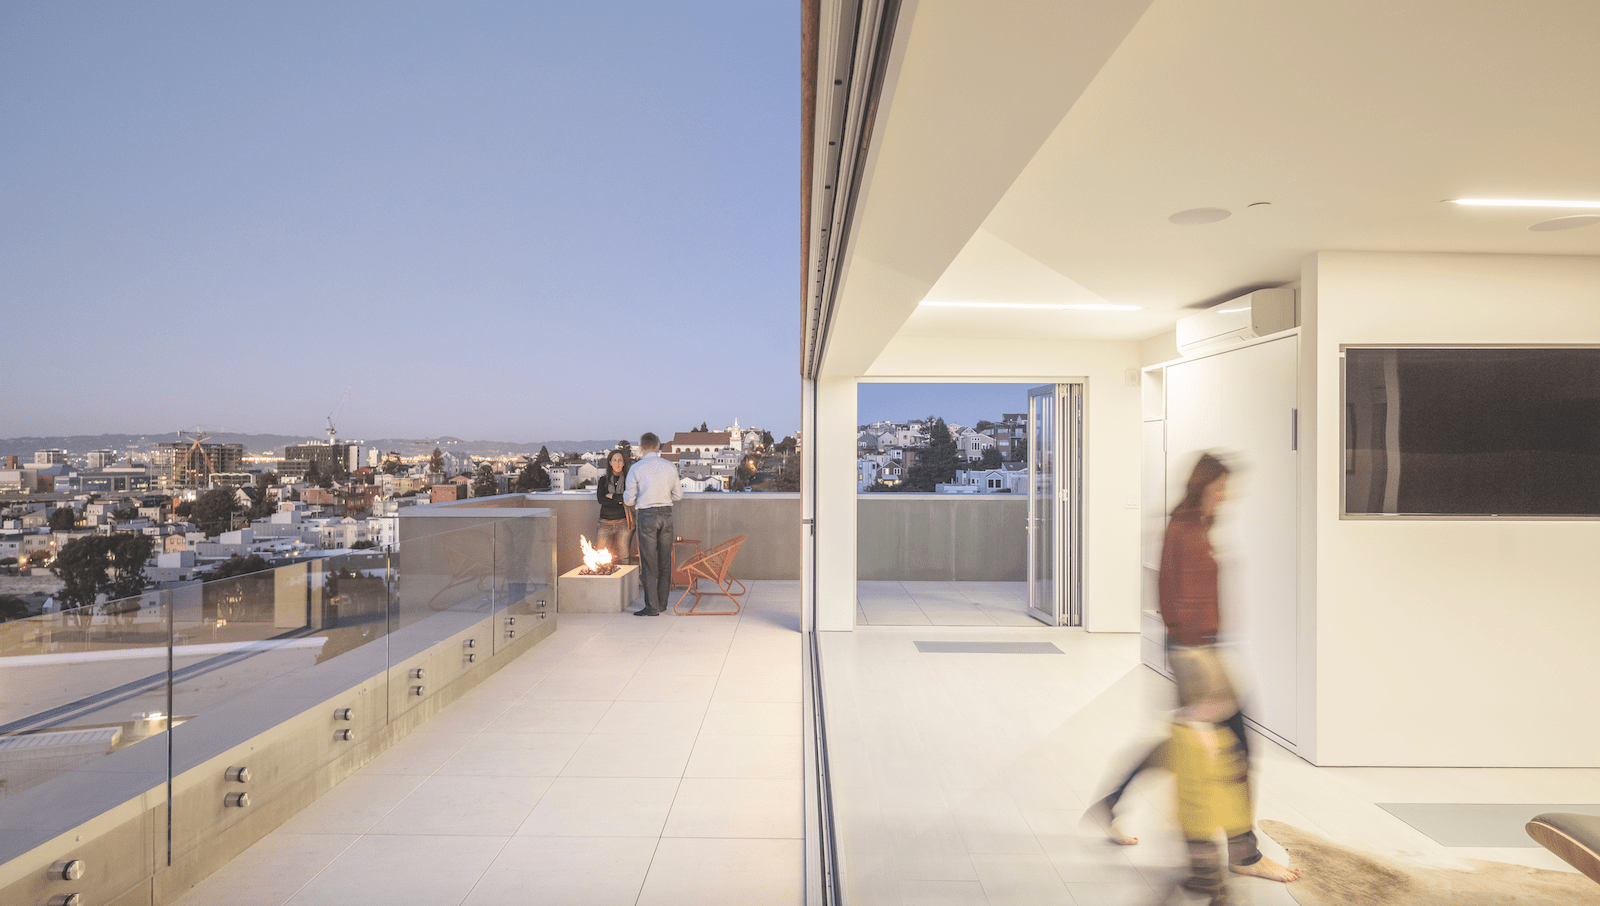 Rooftop living in a Potrero Hill, Calif., home designed by Sidell Pakravan Architects